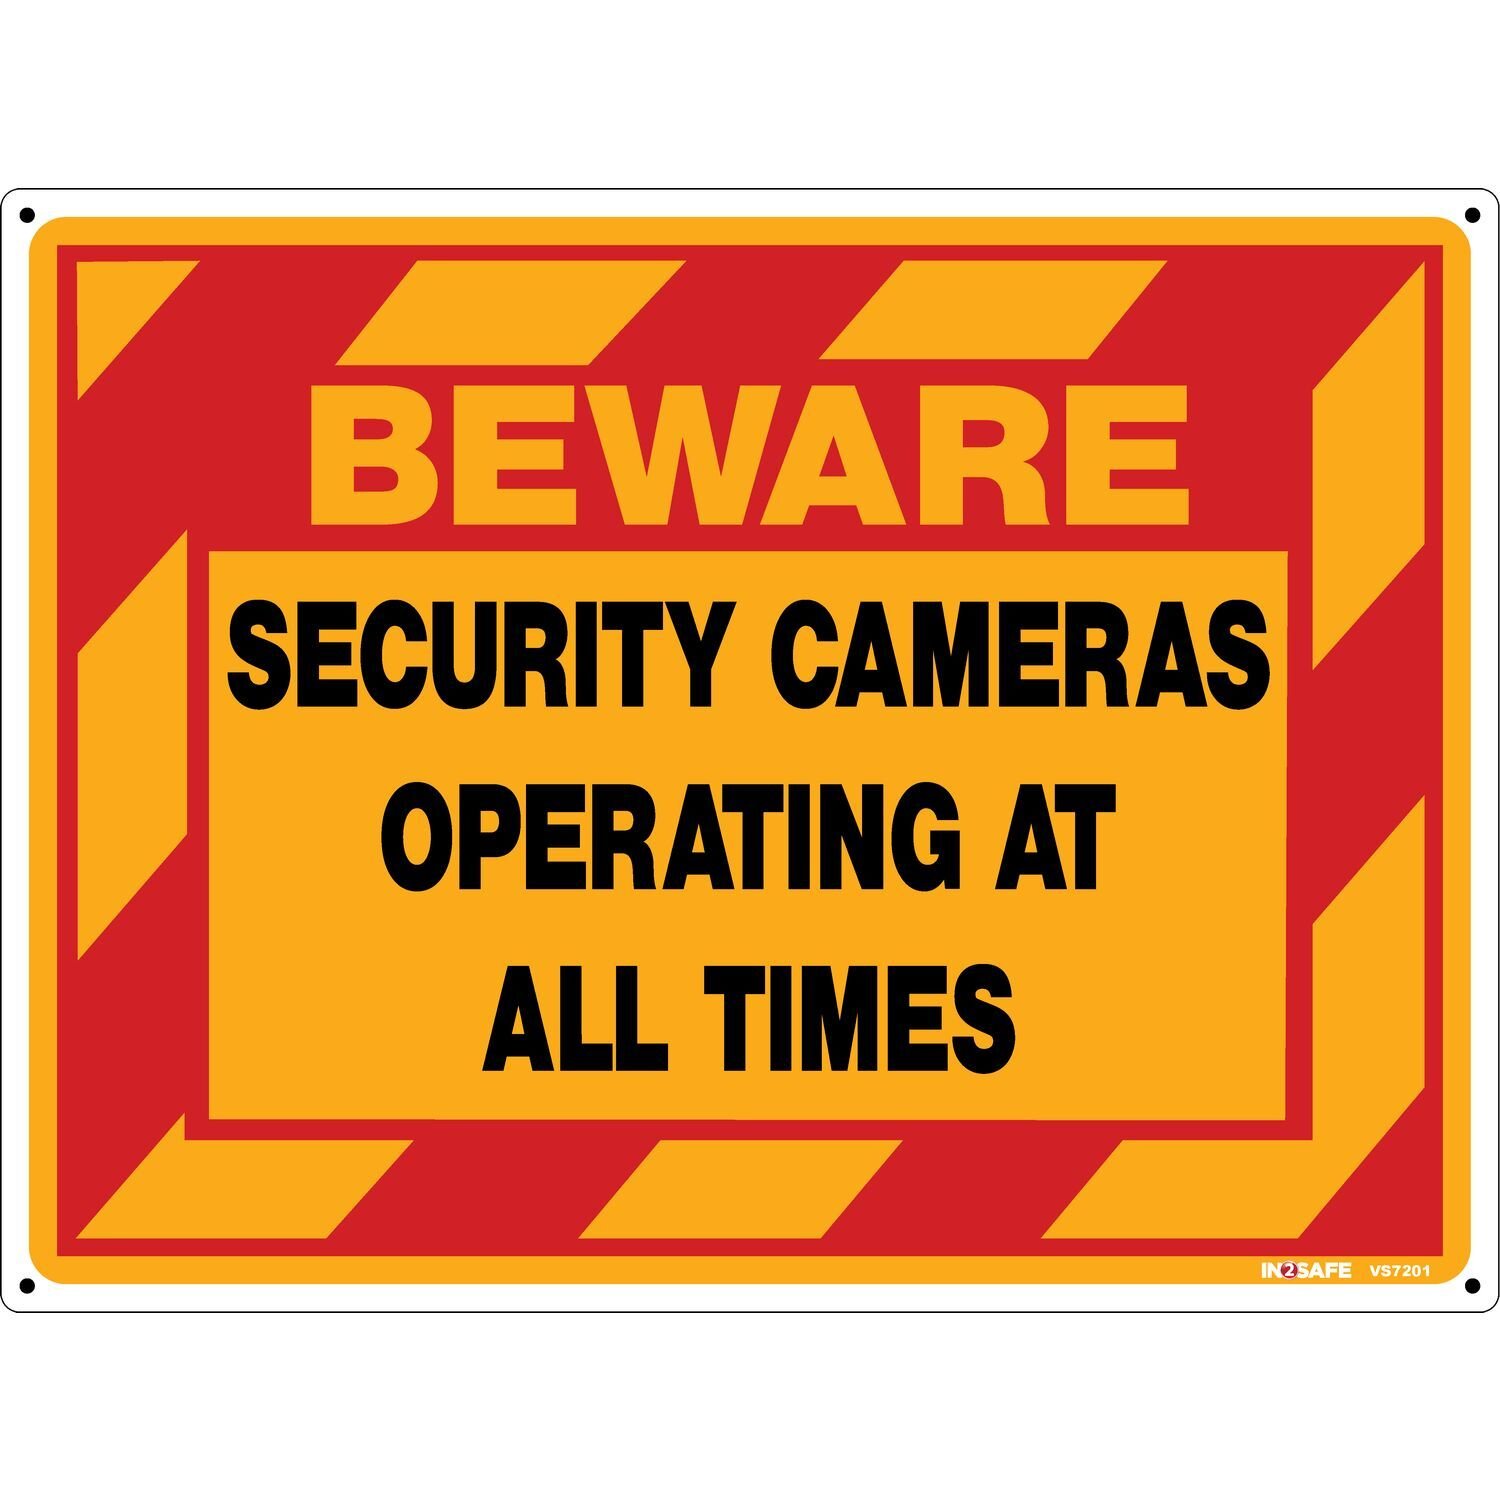 BEWARE Security Cameras Operating At All Times Yel/Red